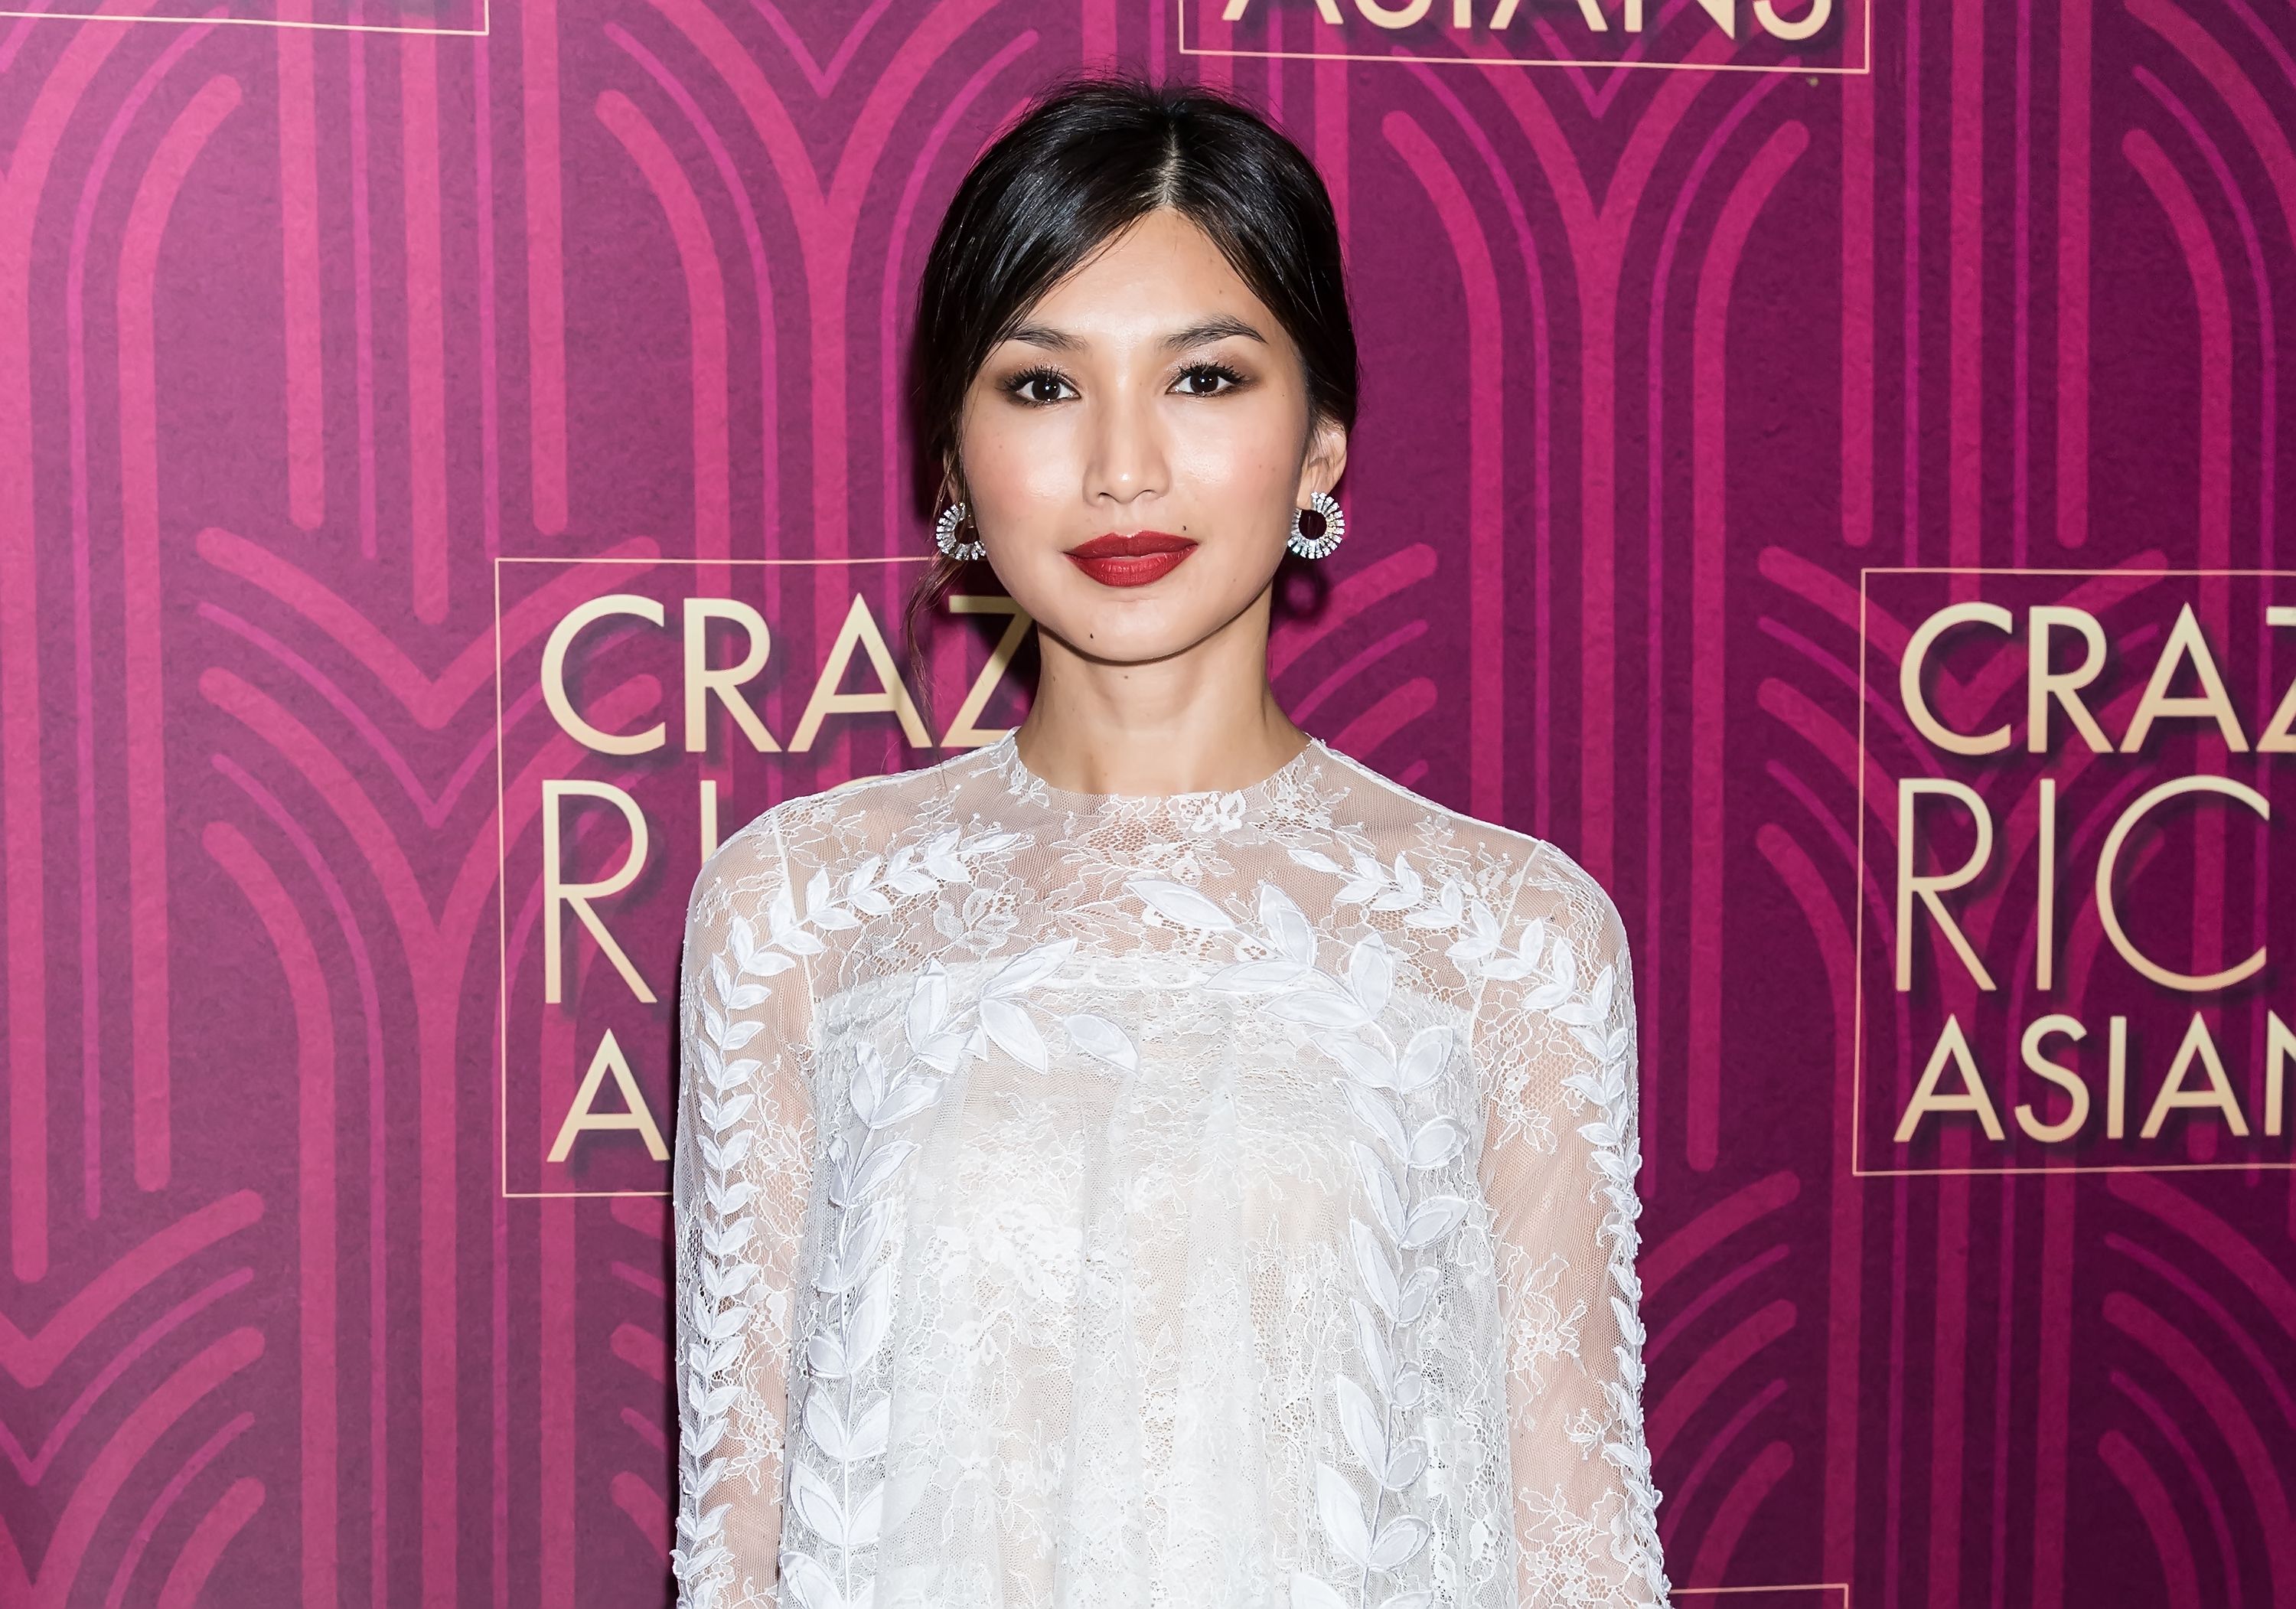 Crazy Rich Asians Spin Off News, Details, Cast | atelier-yuwa.ciao.jp